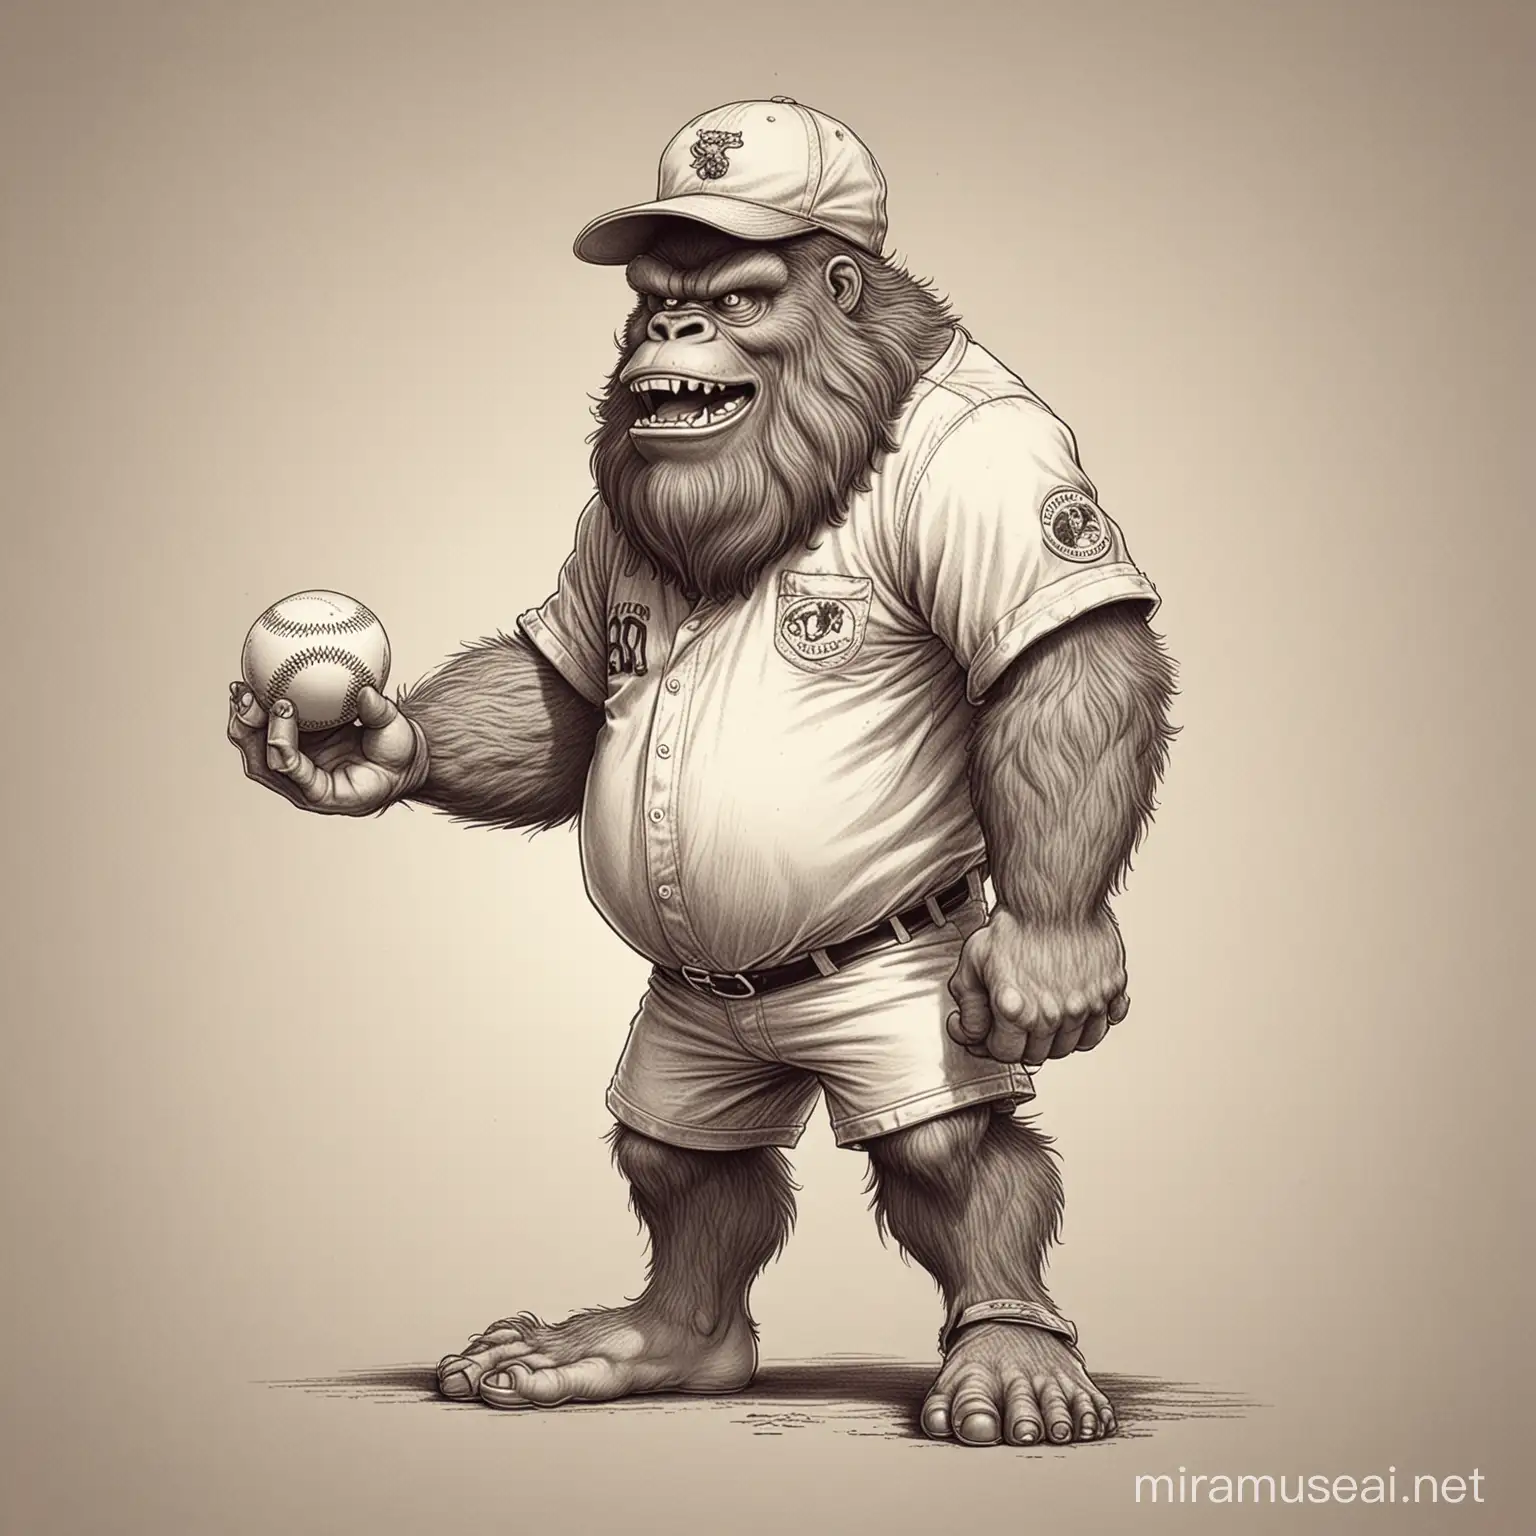 a bigfoot playing baseball, with a baseball hat on, wearing shorts, line art vintage looney tunes style
